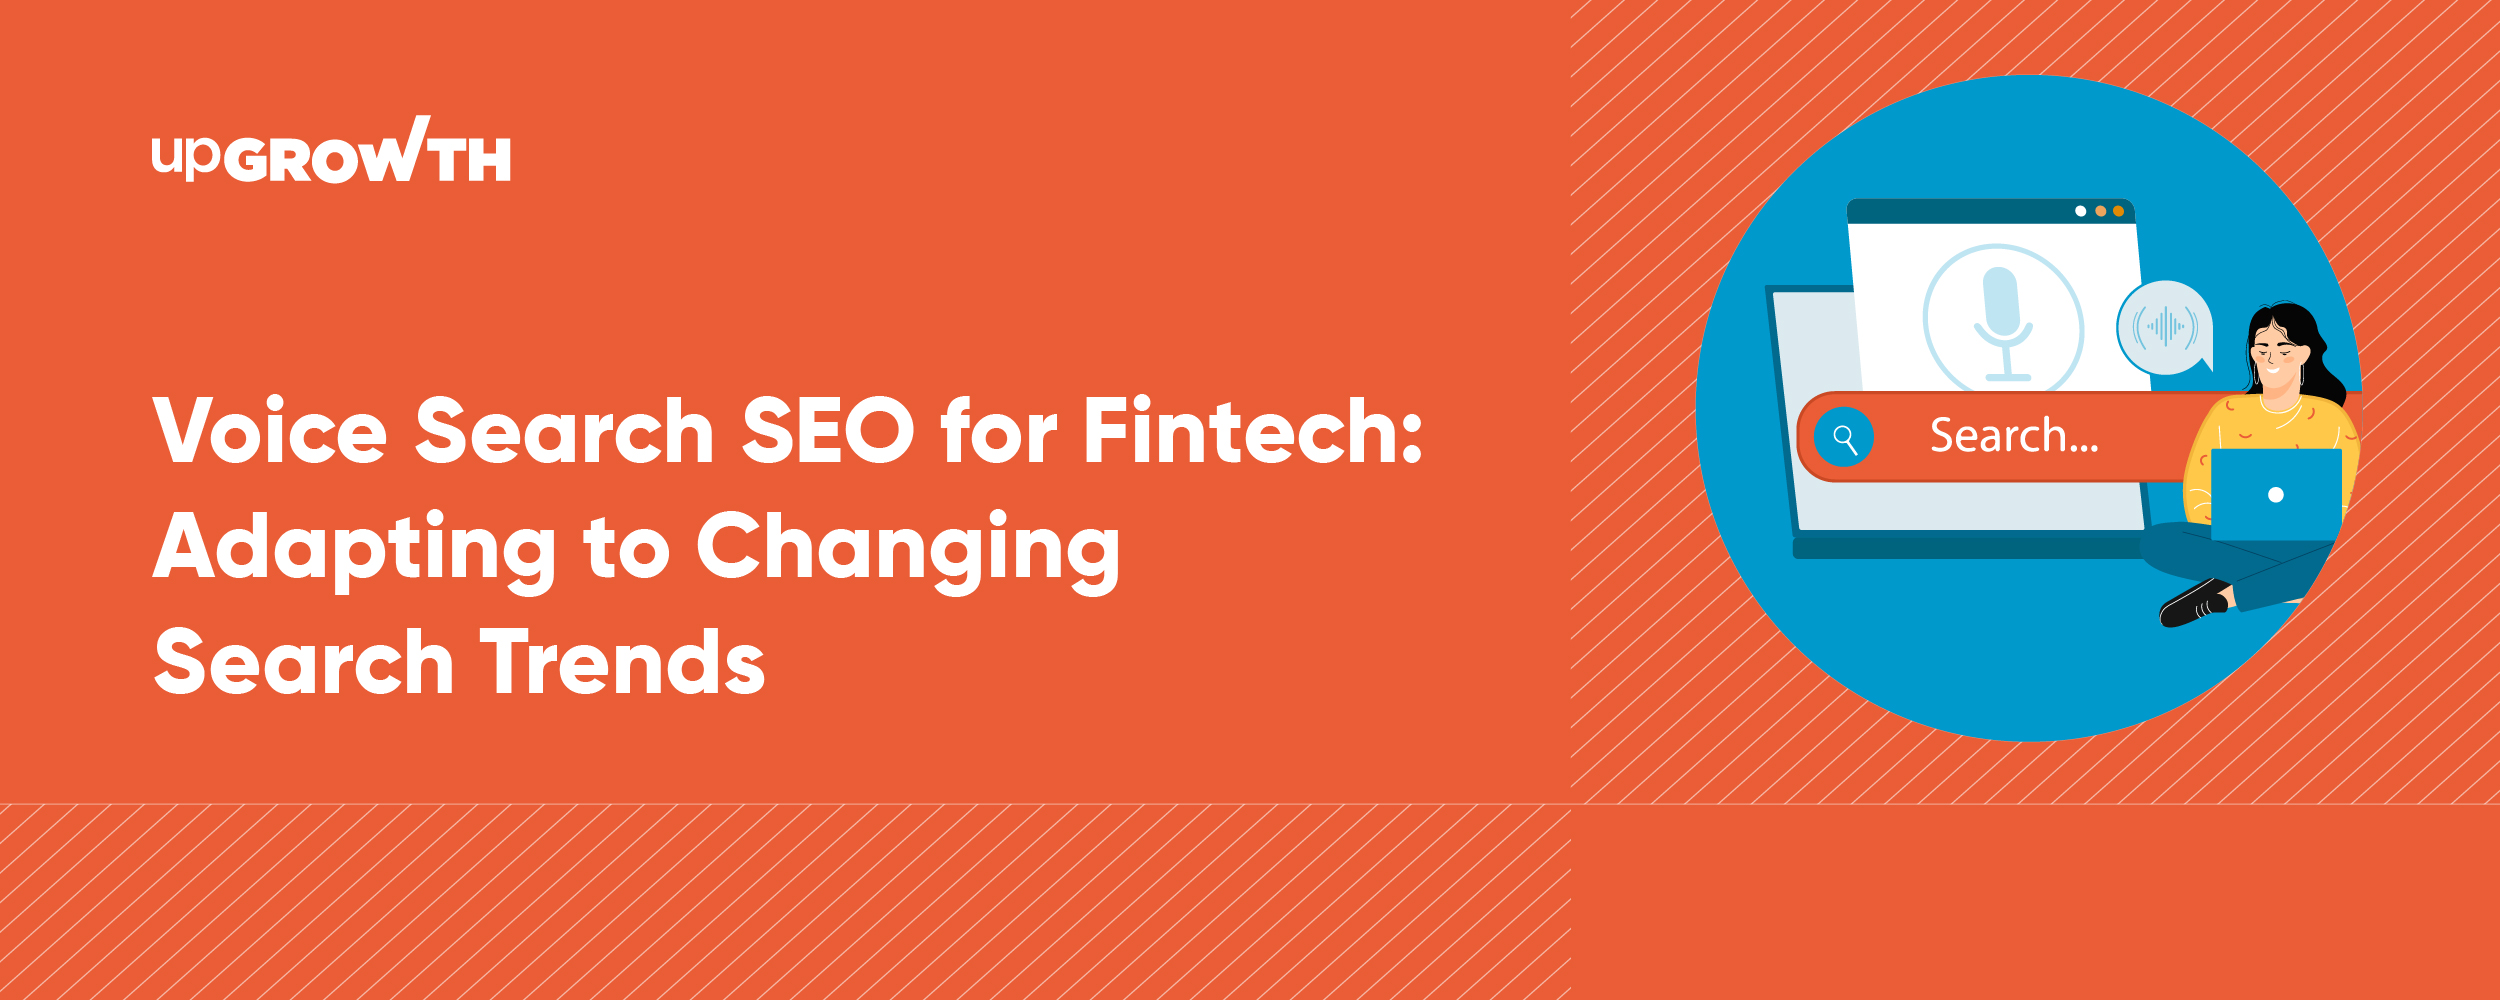 Voice Search SEO for Fintech